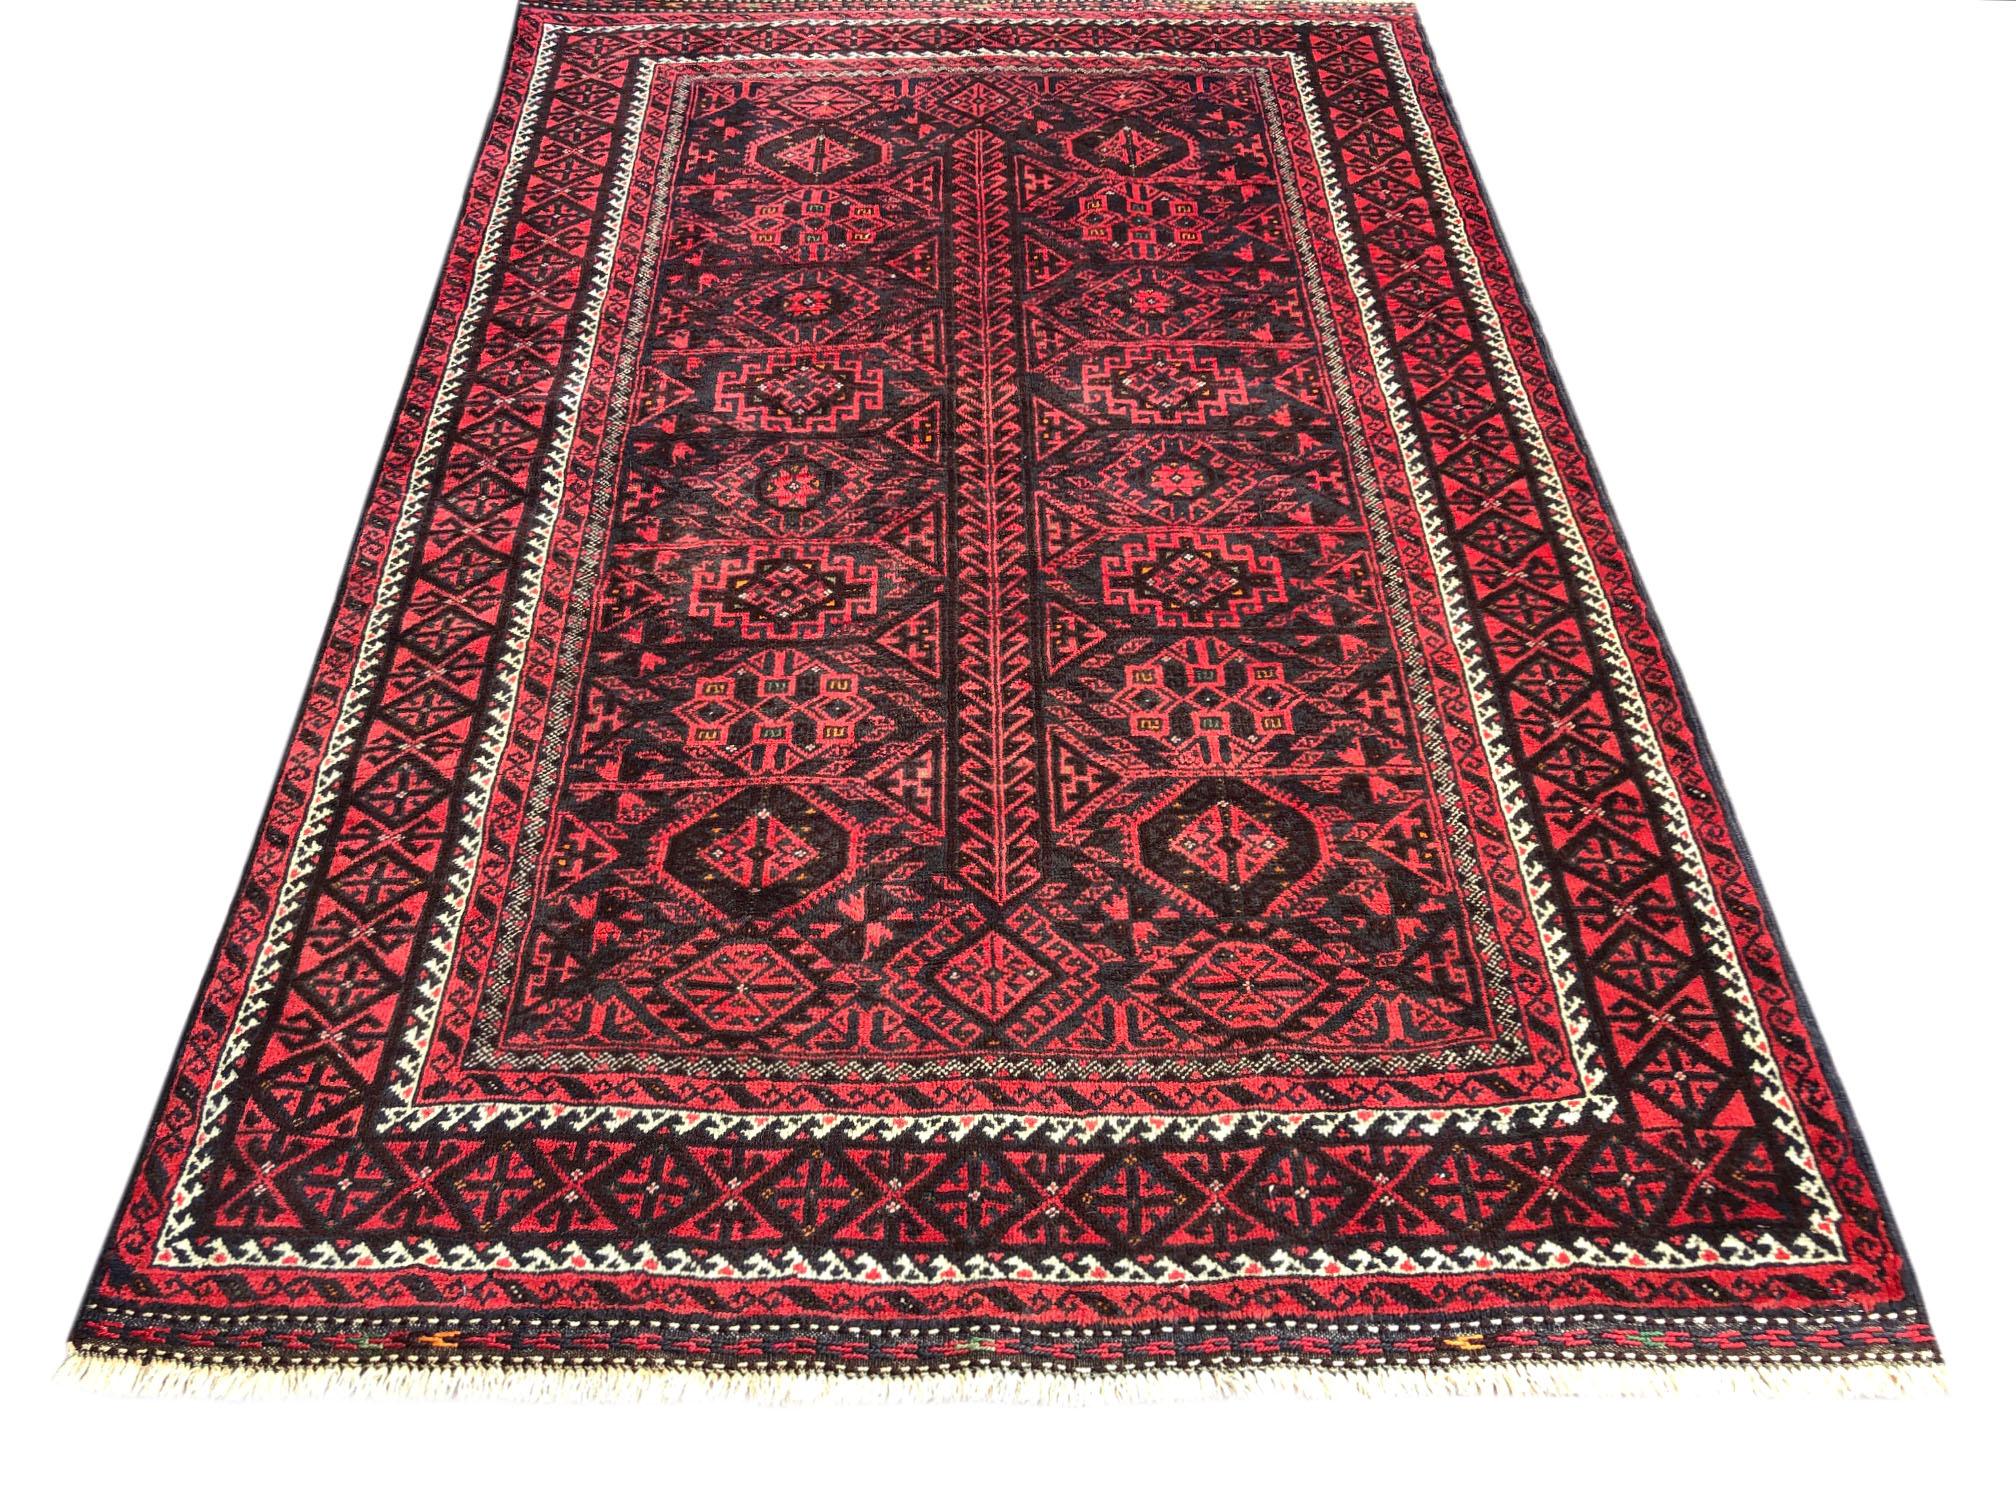 This authentic Persian Baluchi rug has wool pile foundation which is hand knotted by the nomads of Baluchi. The age of this rug is almost 50 years old. The size of this rug is 4 feet 5 inches wide by 6 feet 3 inches tall. Baluchi rugs are soft and